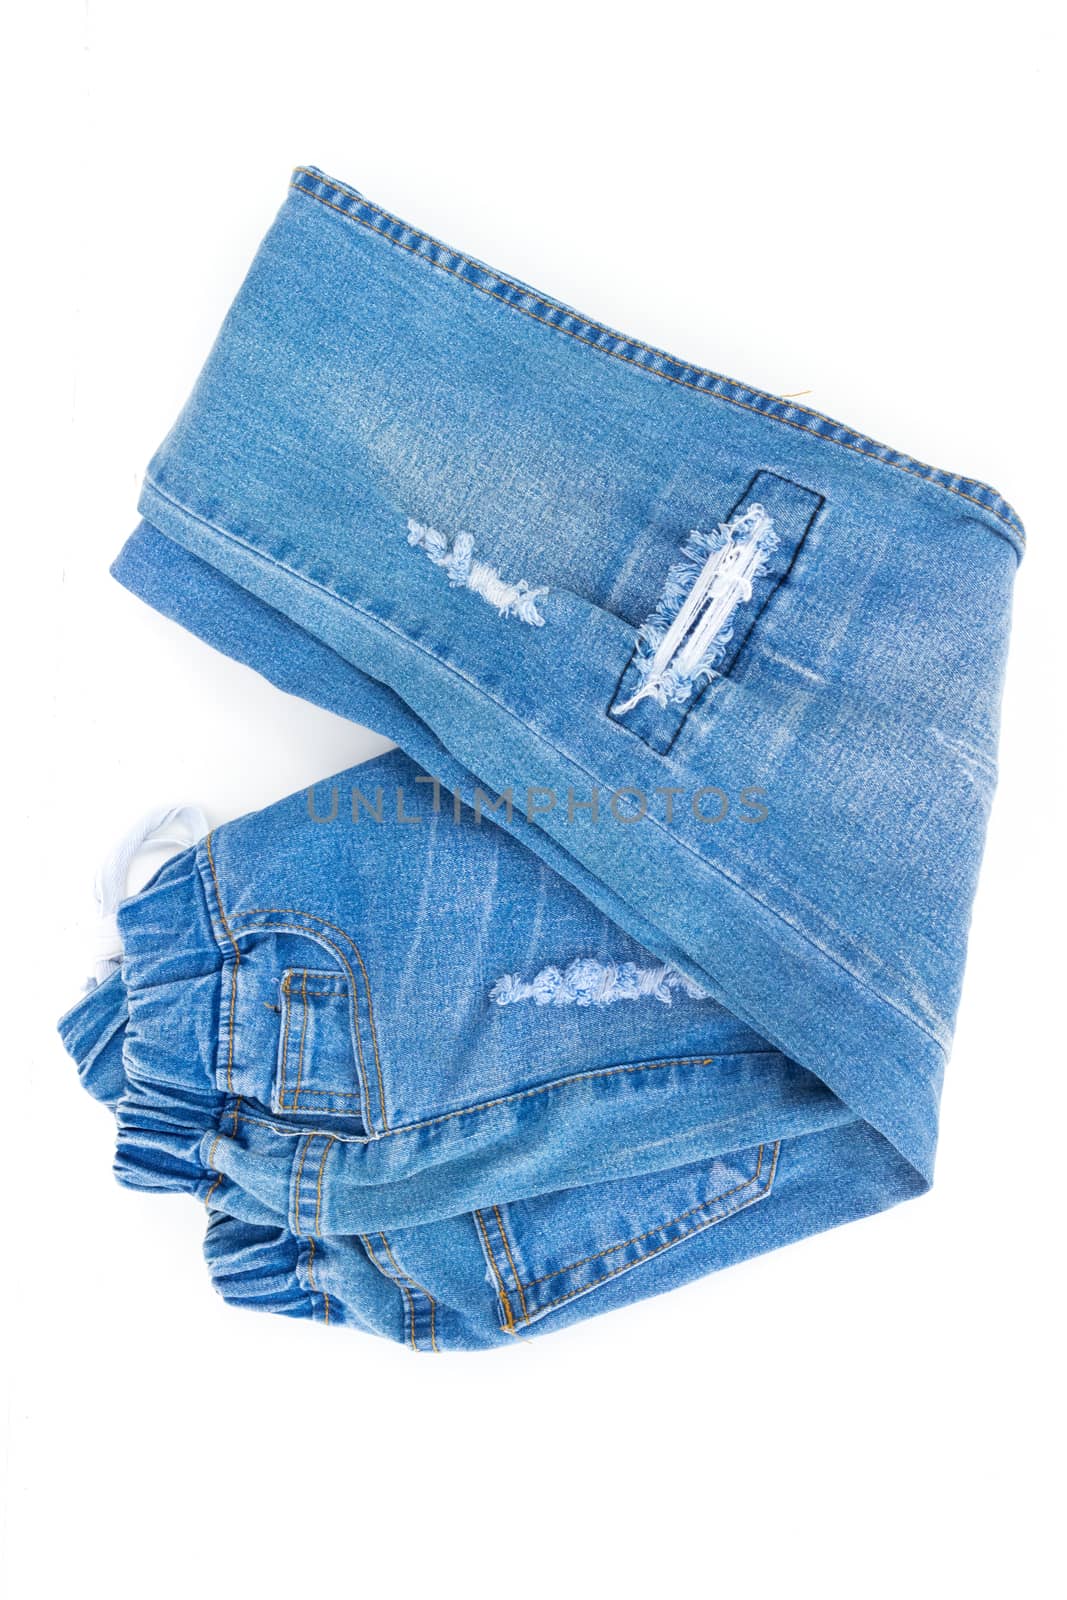 Destroyed jeans, Fold pants on white background